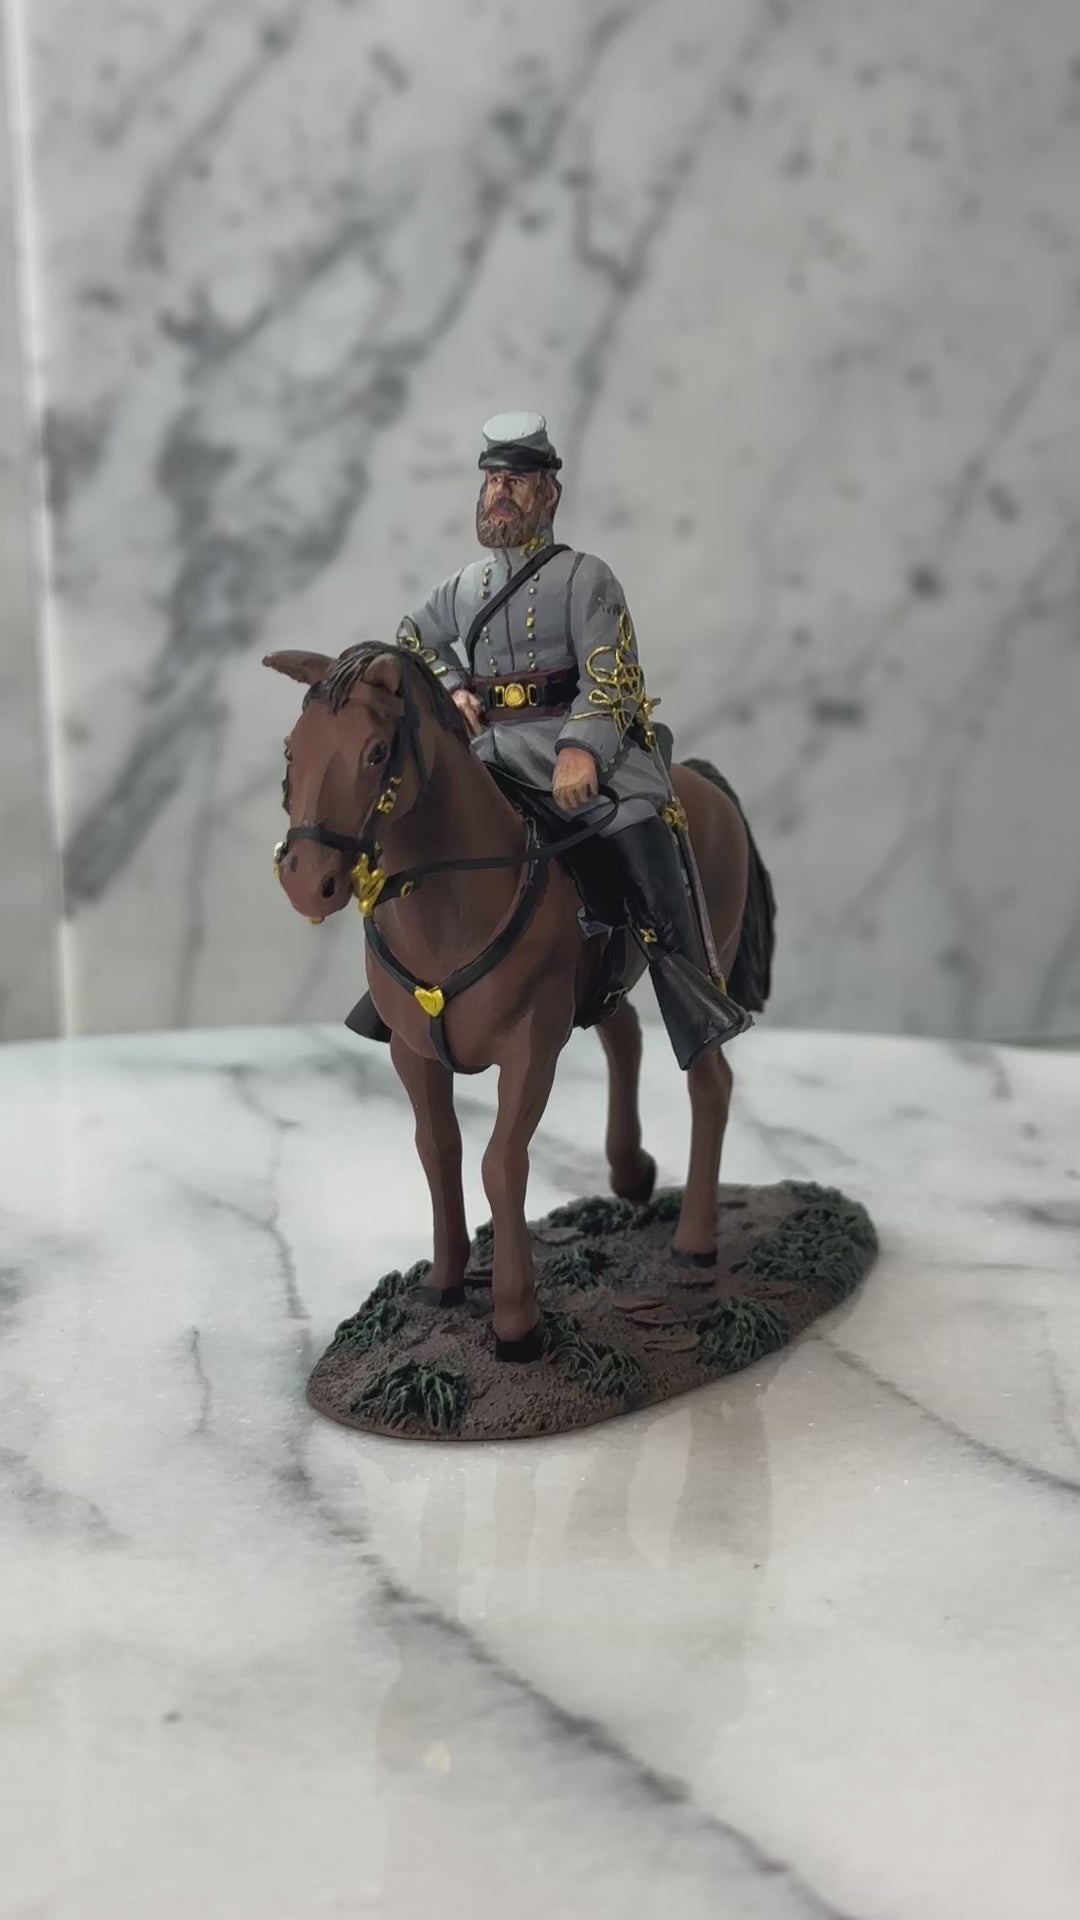 360 degree view of Collectible toy soldier miniature "Stonewall" Jackson Mounted on Little Sorrel.